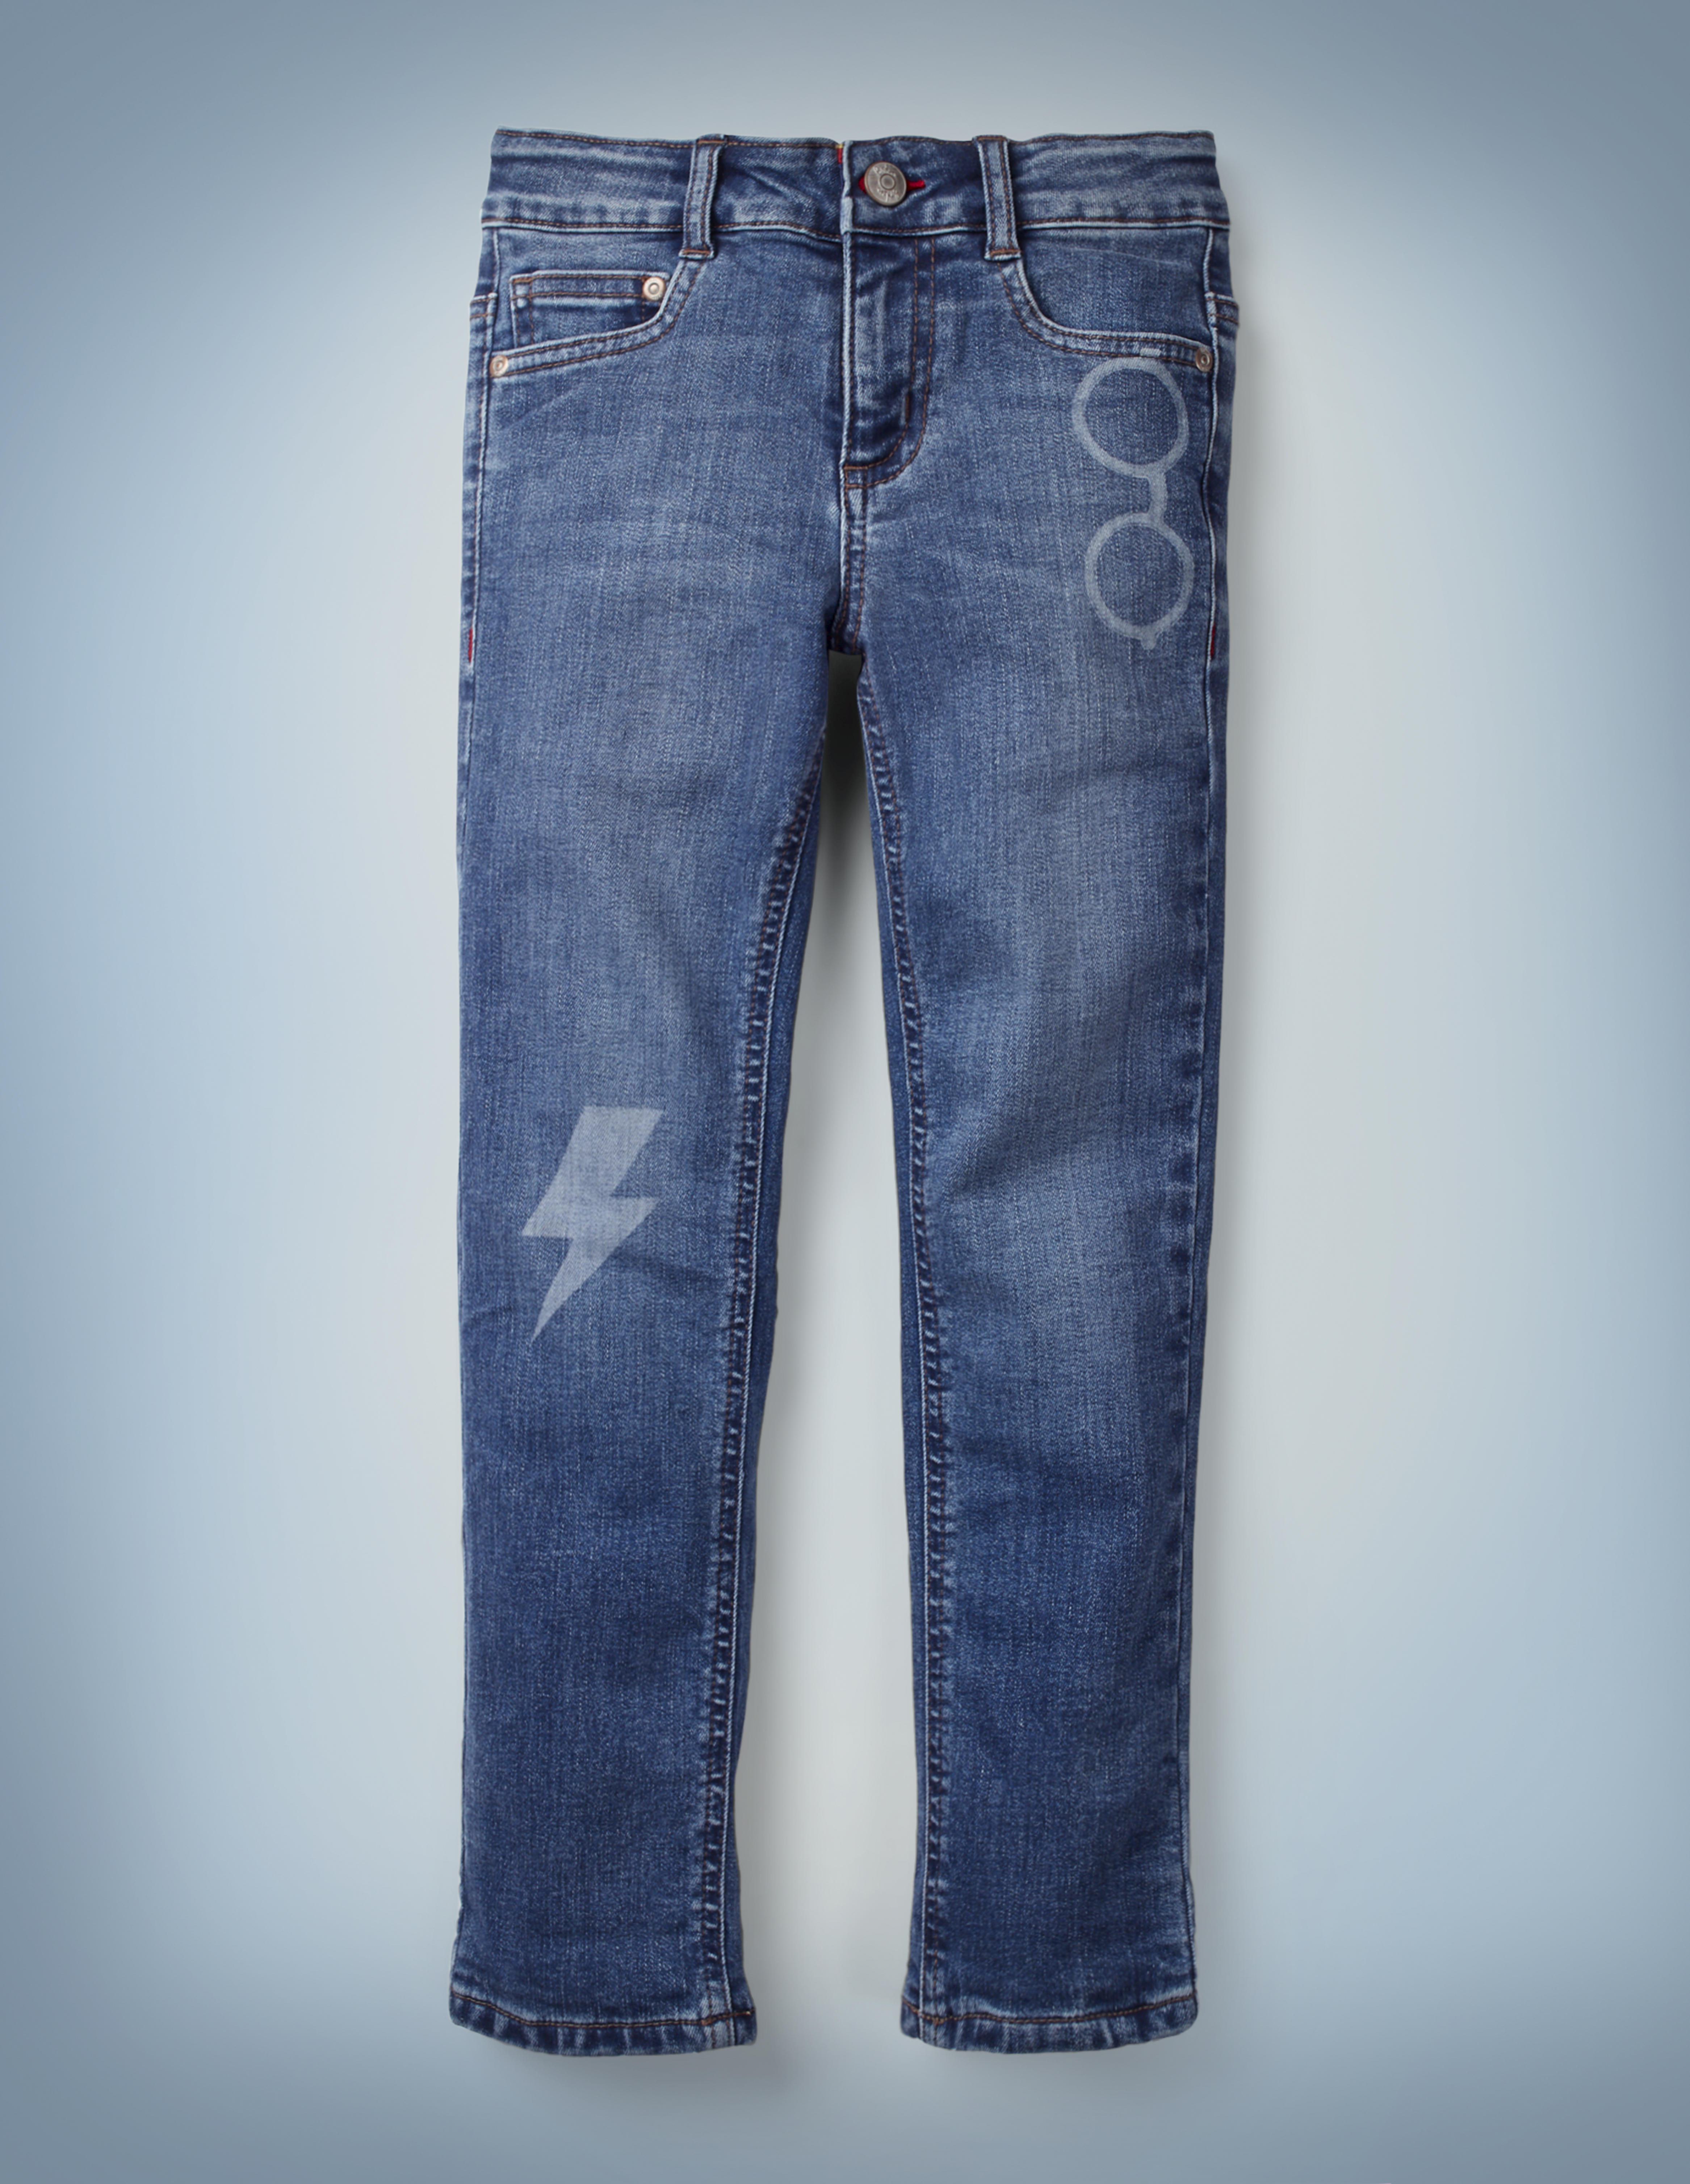 The Mini Boden Lightning Bolt Slim Jeans are super cute, featuring faded images of Harry Potter’s glasses near the left front pocket and his lightning bolt scar on the right leg. They retail at £28.